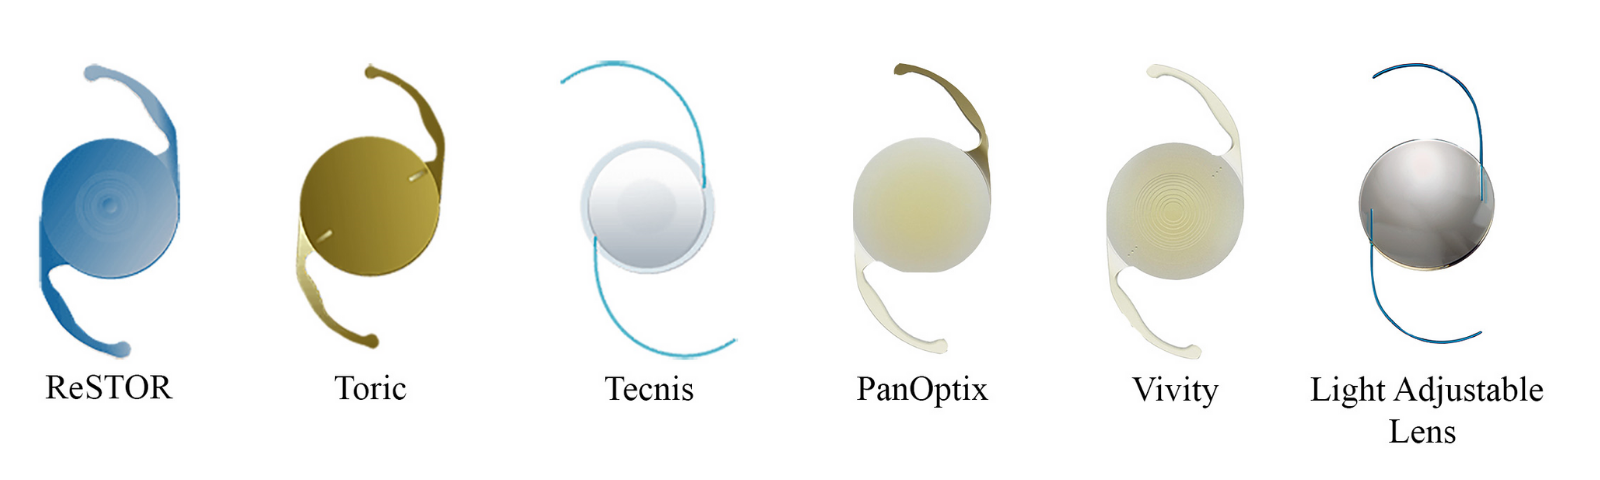 Differences between Toric vs Non Toric Lenses